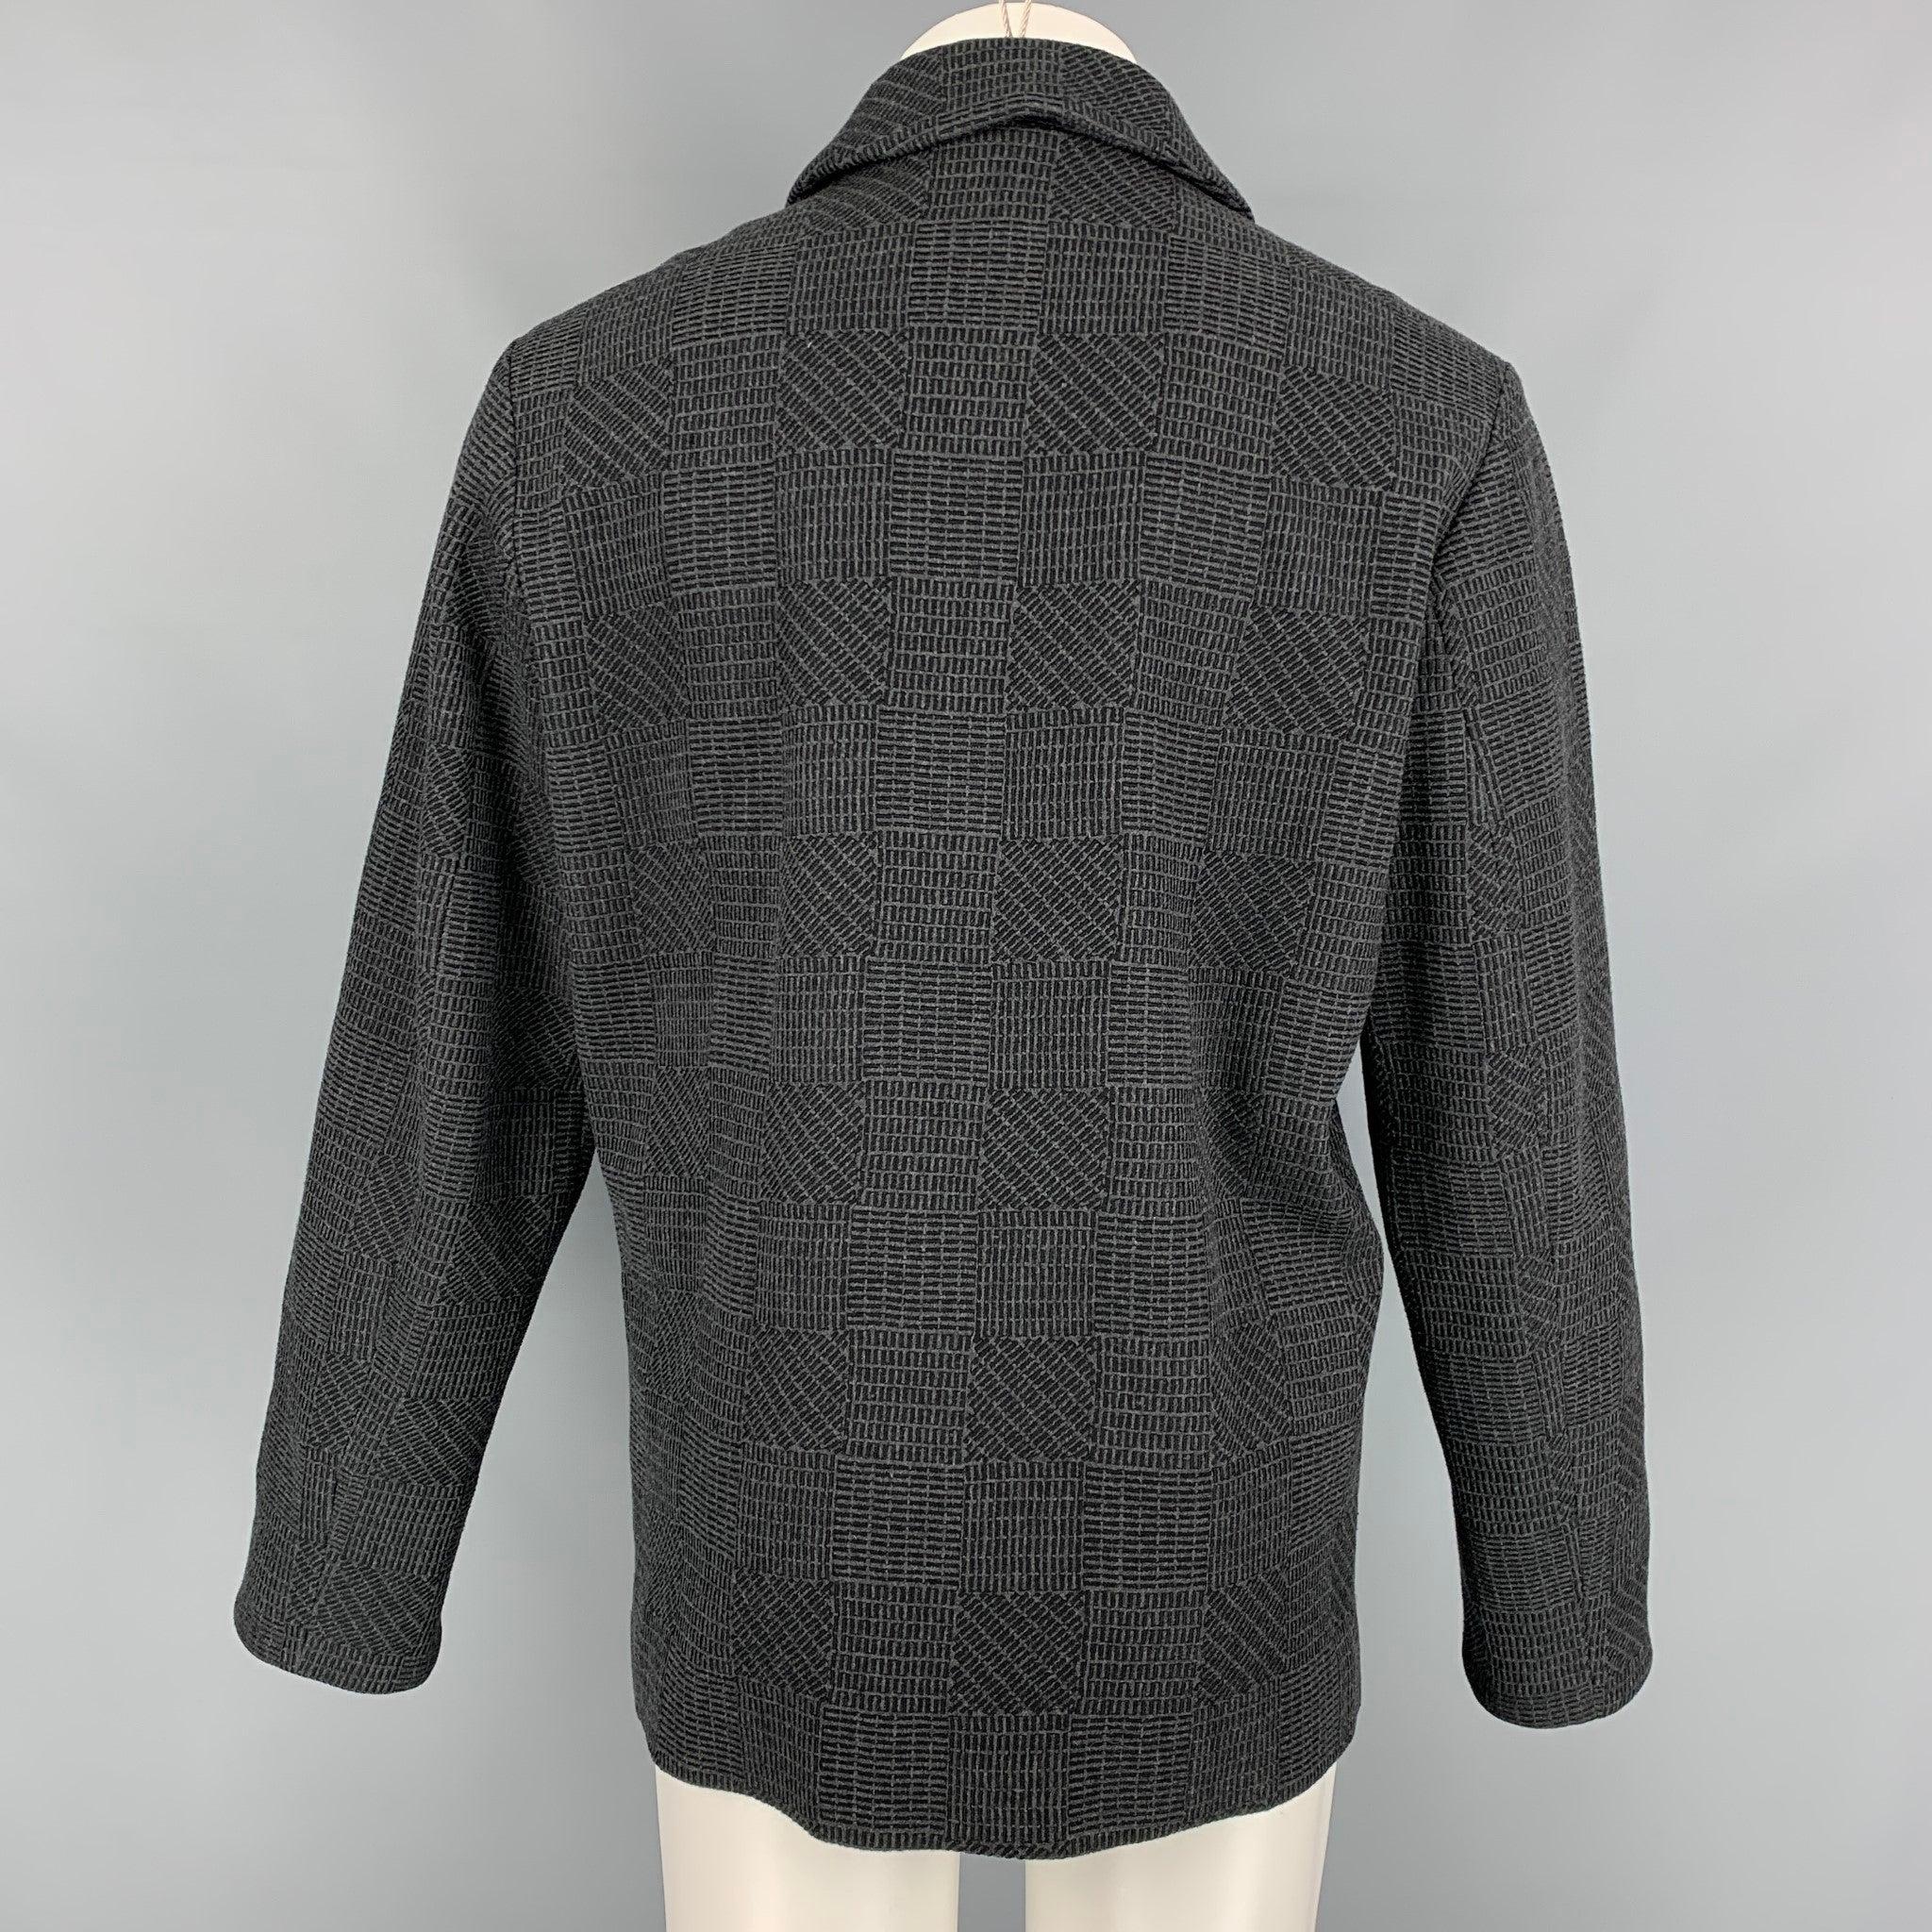 CALVIN KLEIN COLLECTION Size 38 Charcoal Black Textured Wool / Cashmere Jacket 1